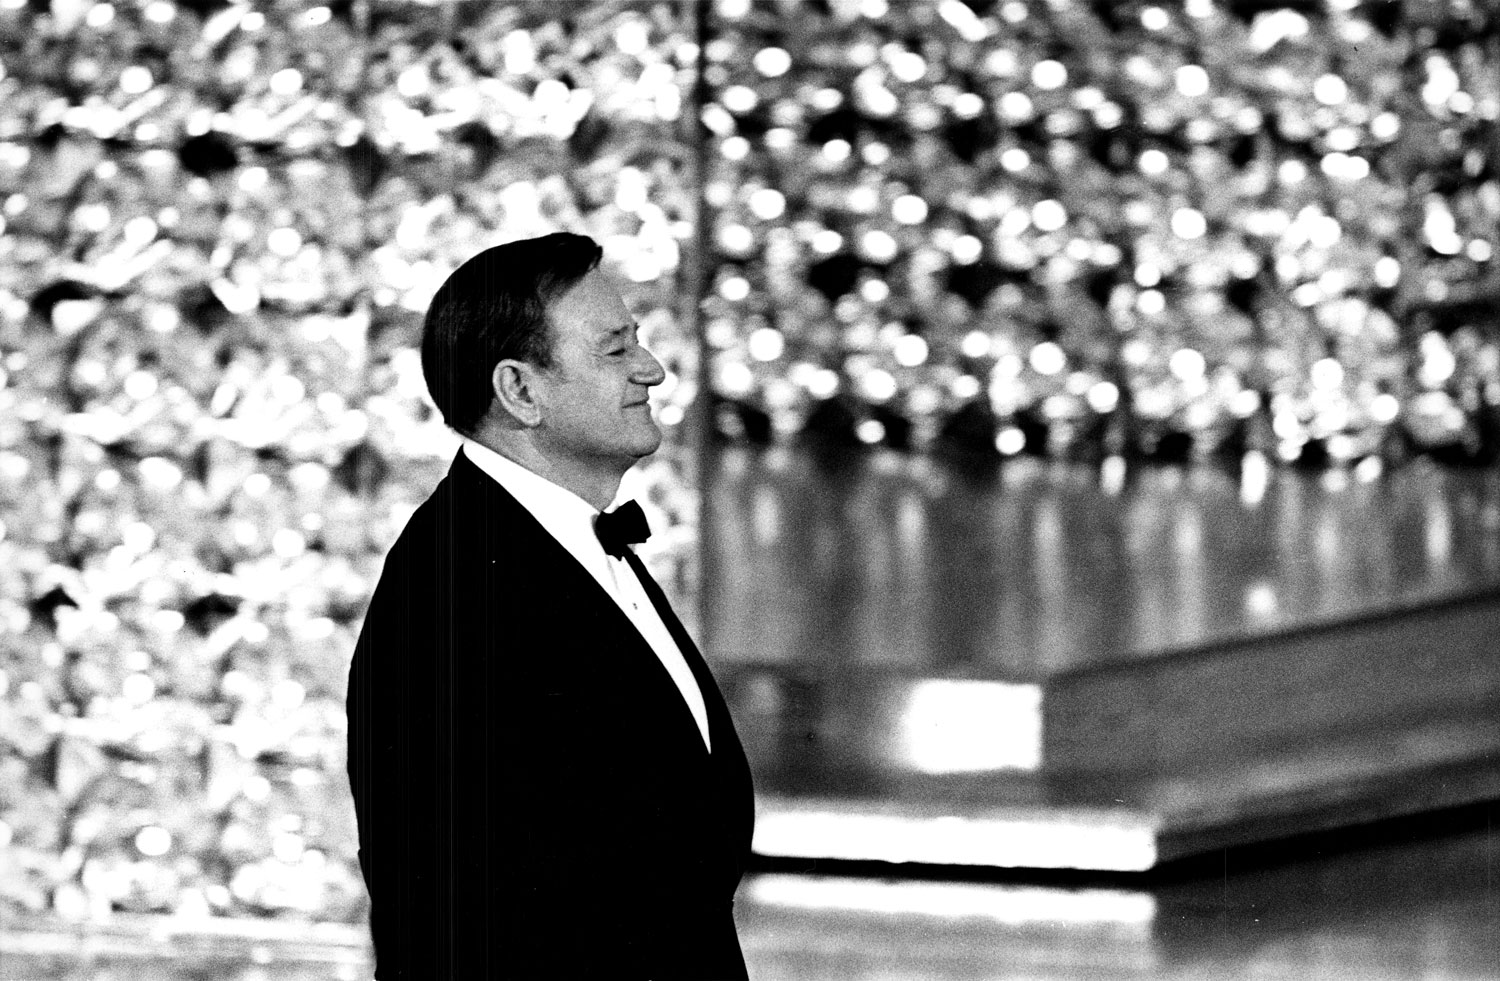 John Wayne walking onstage to accept his Oscar for his performance in True Grit (1969). Photo courtesy of the Academy of Motion Picture Arts and Sciences